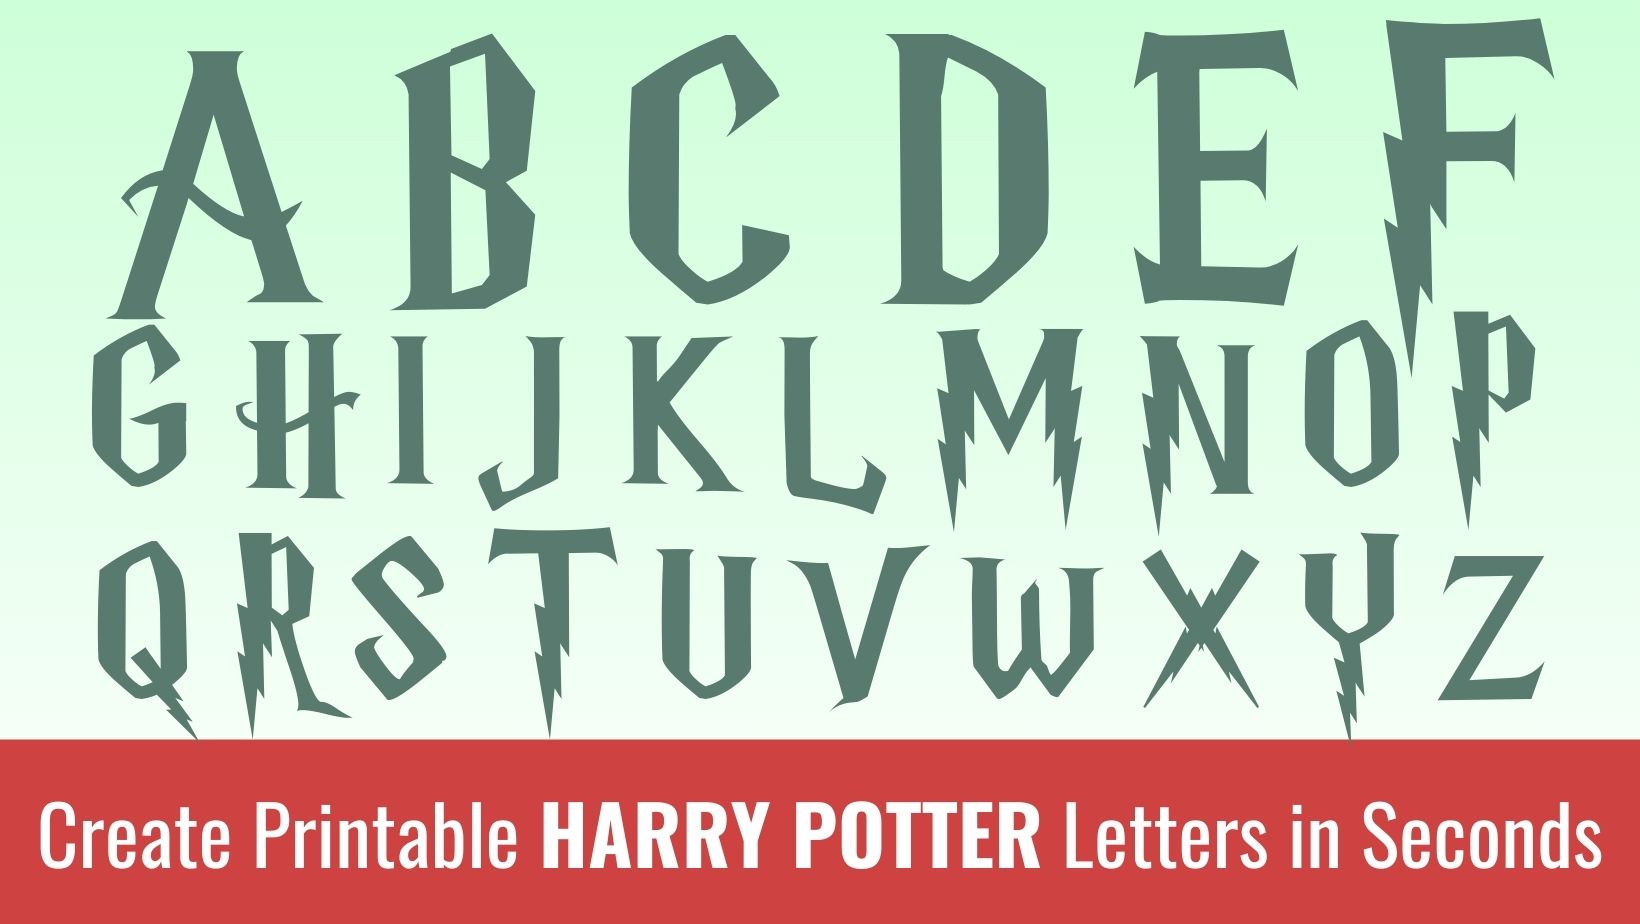 Printable harry potter Letters: Free Alphabet Font and Letter Templates